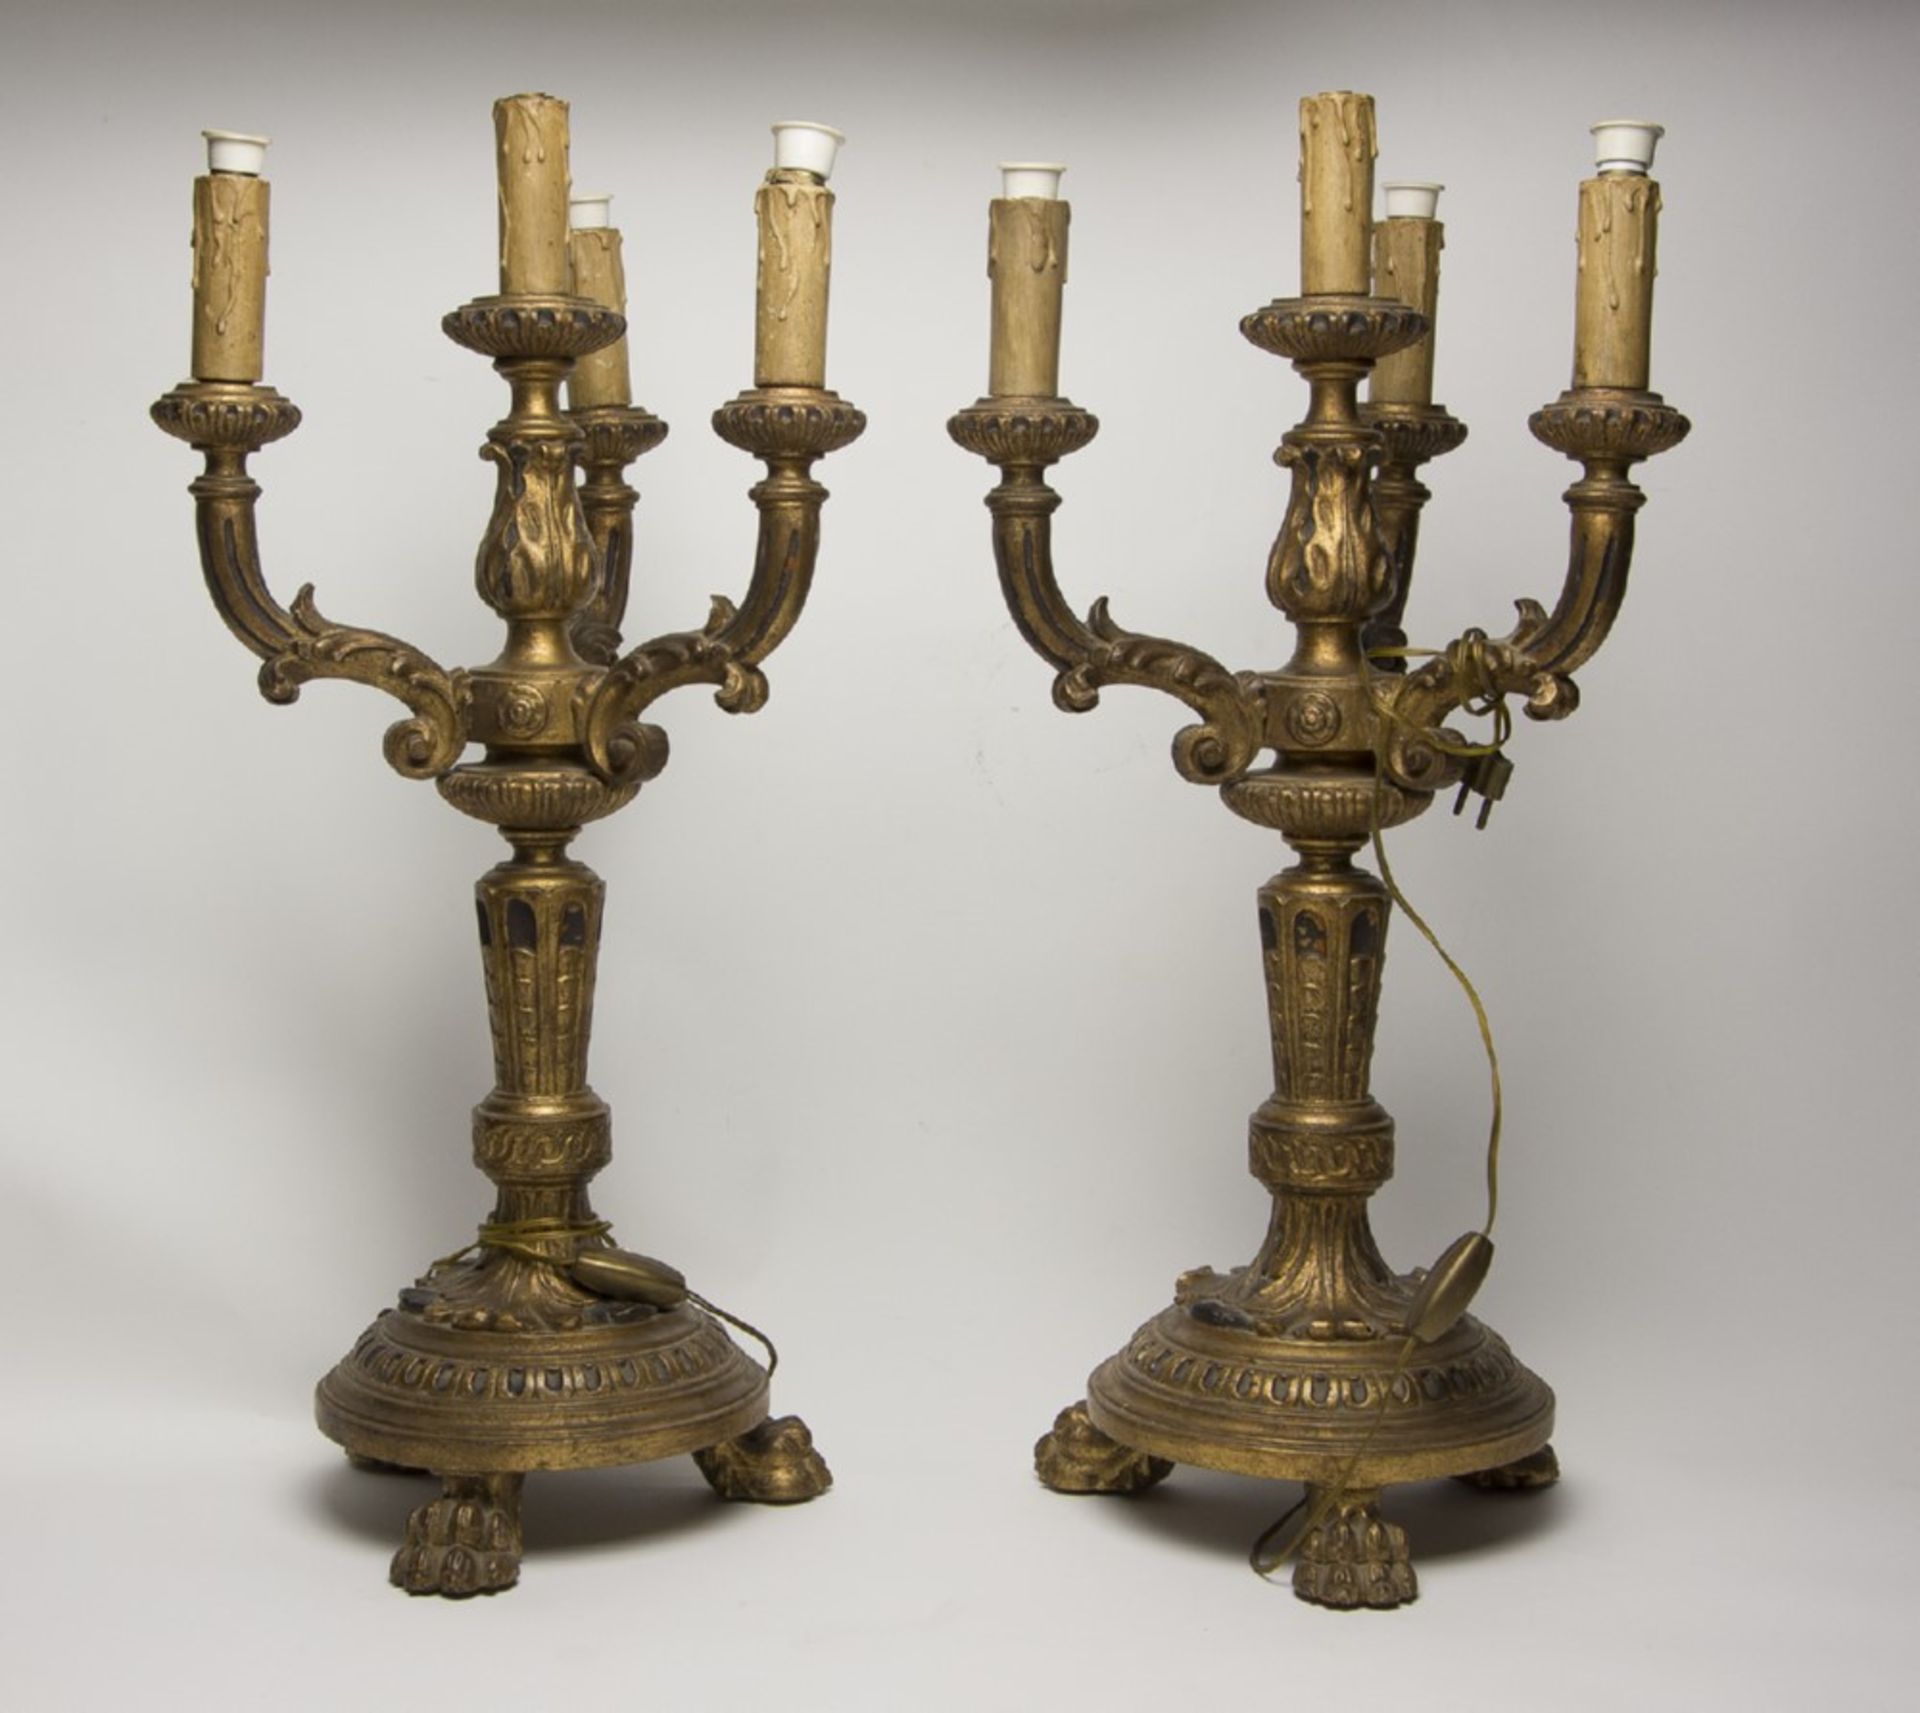 PAIR OF GILTWOOD CANDLESTICKS, LATE 19TH-CENTURY carved leaves, swirls and curls. Four arms.